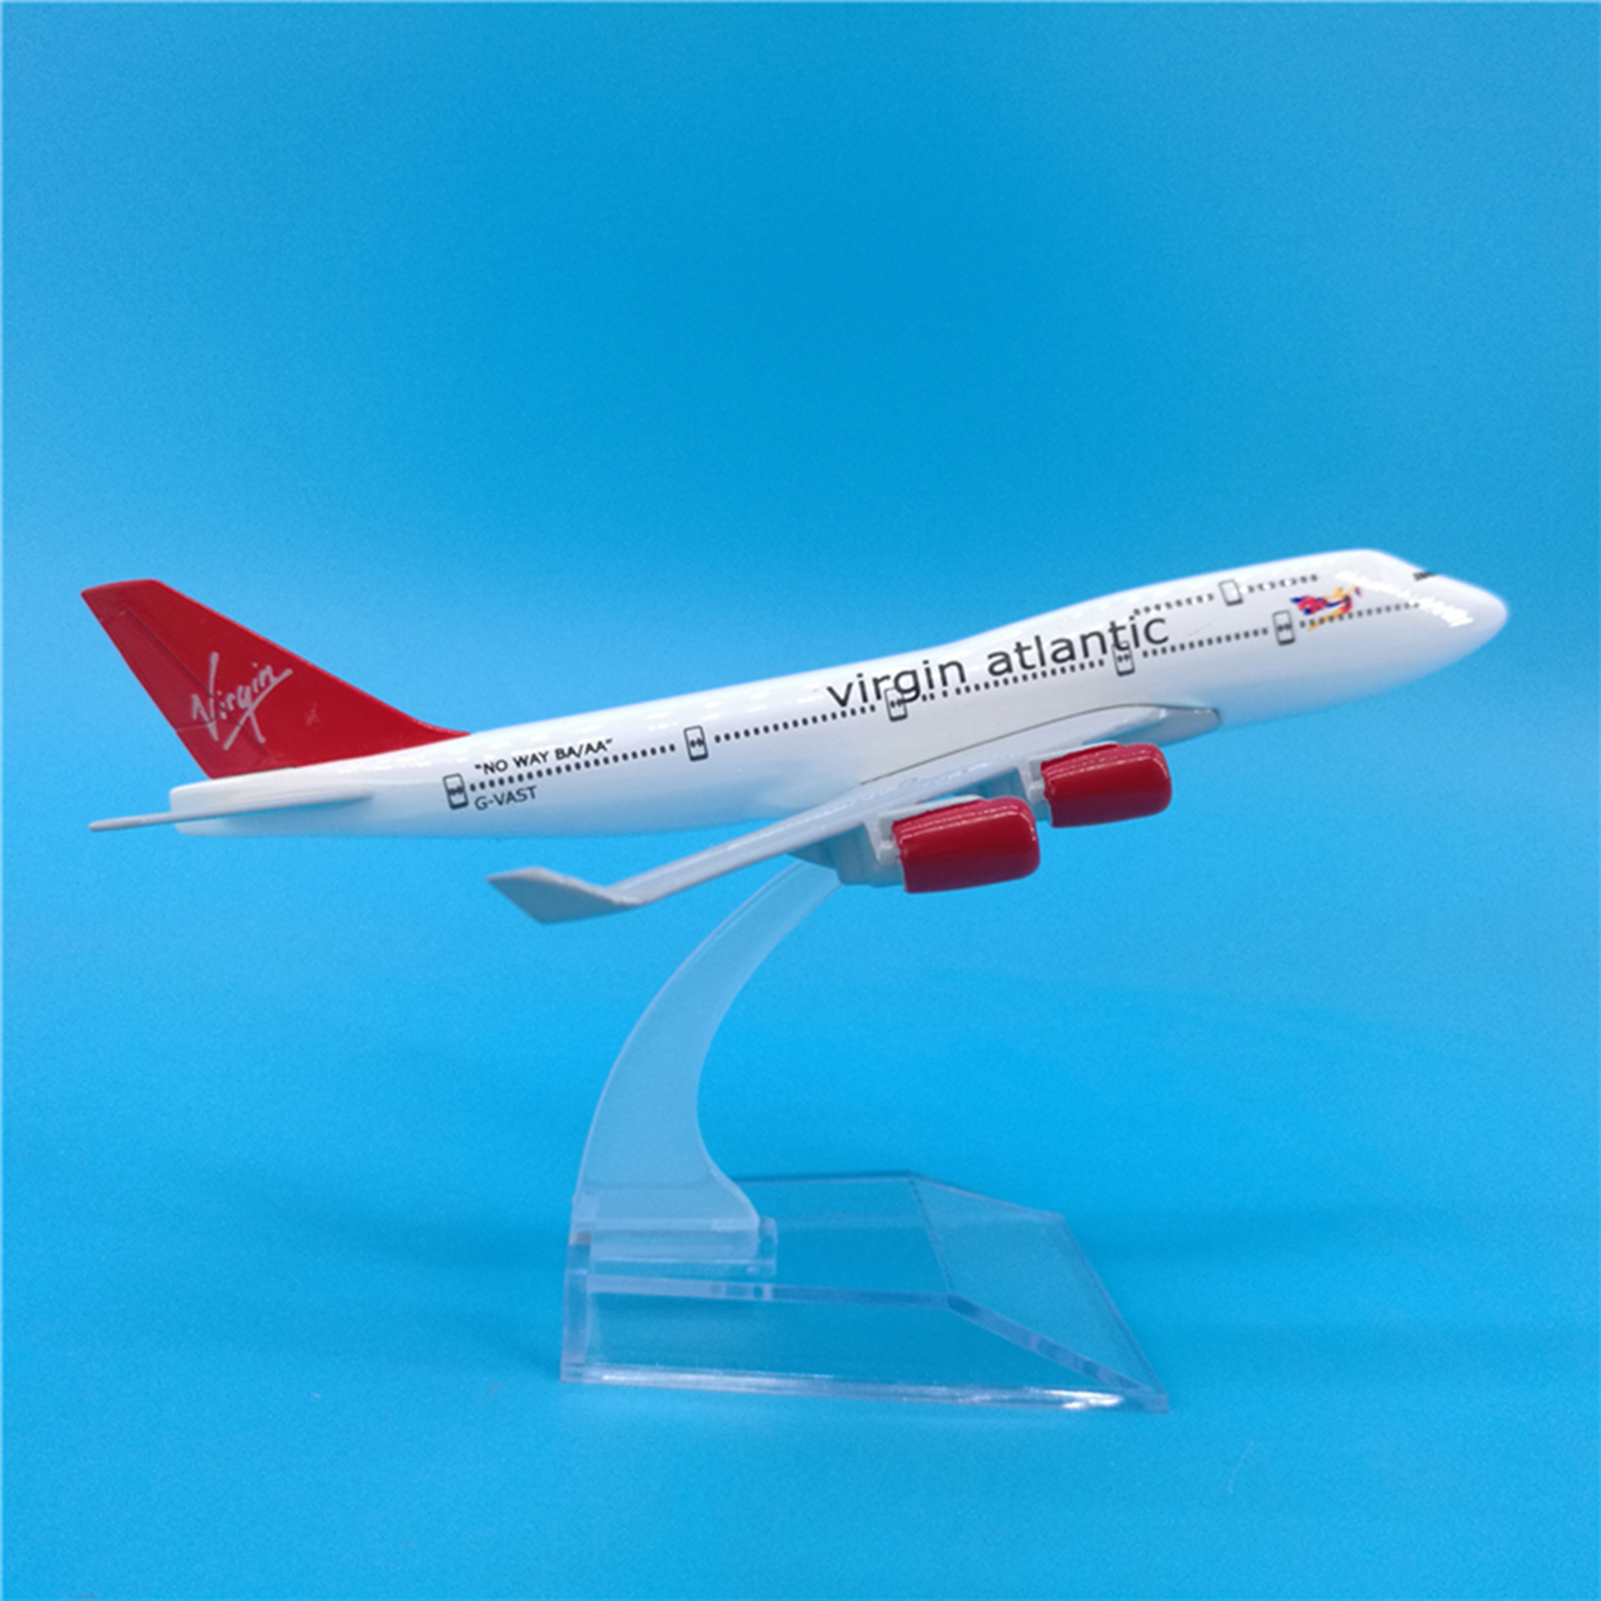 16cm Desktop Toy Metal Aircraft Model Aircraft Boeing Die Casting Airline XM